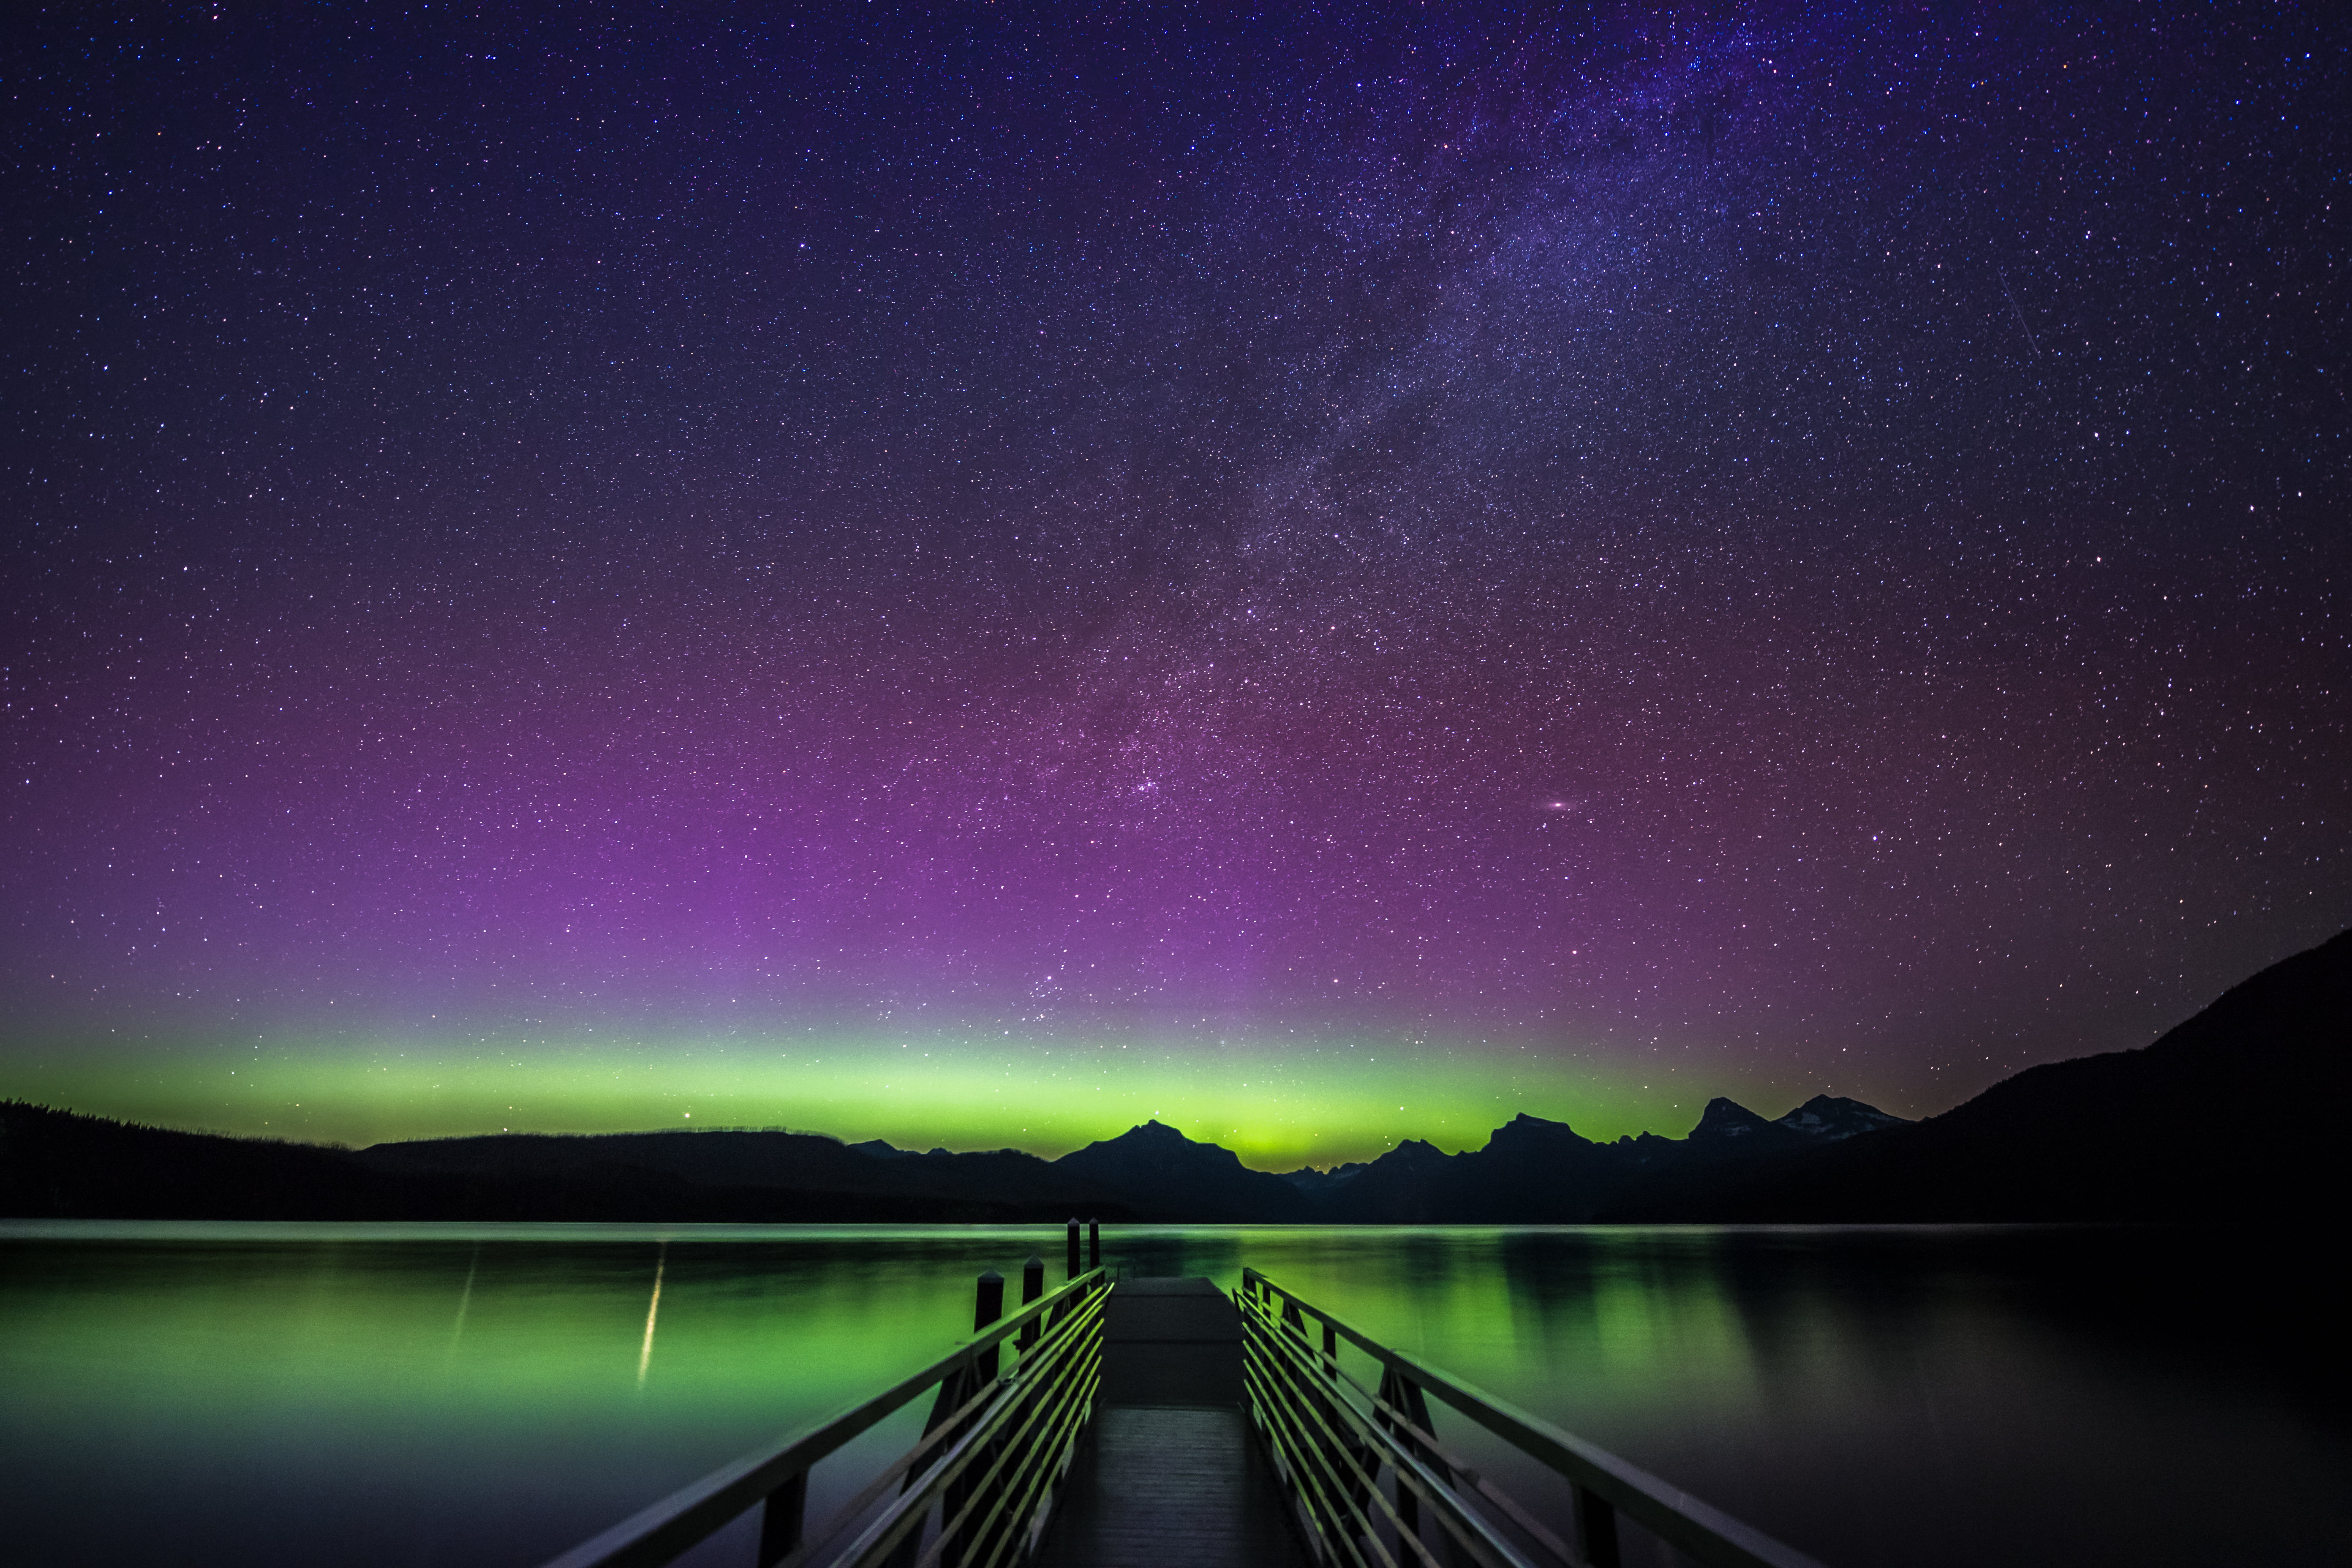 empty dock surrounded with calm body of water under purple and black sky, lake mcdonald, montana